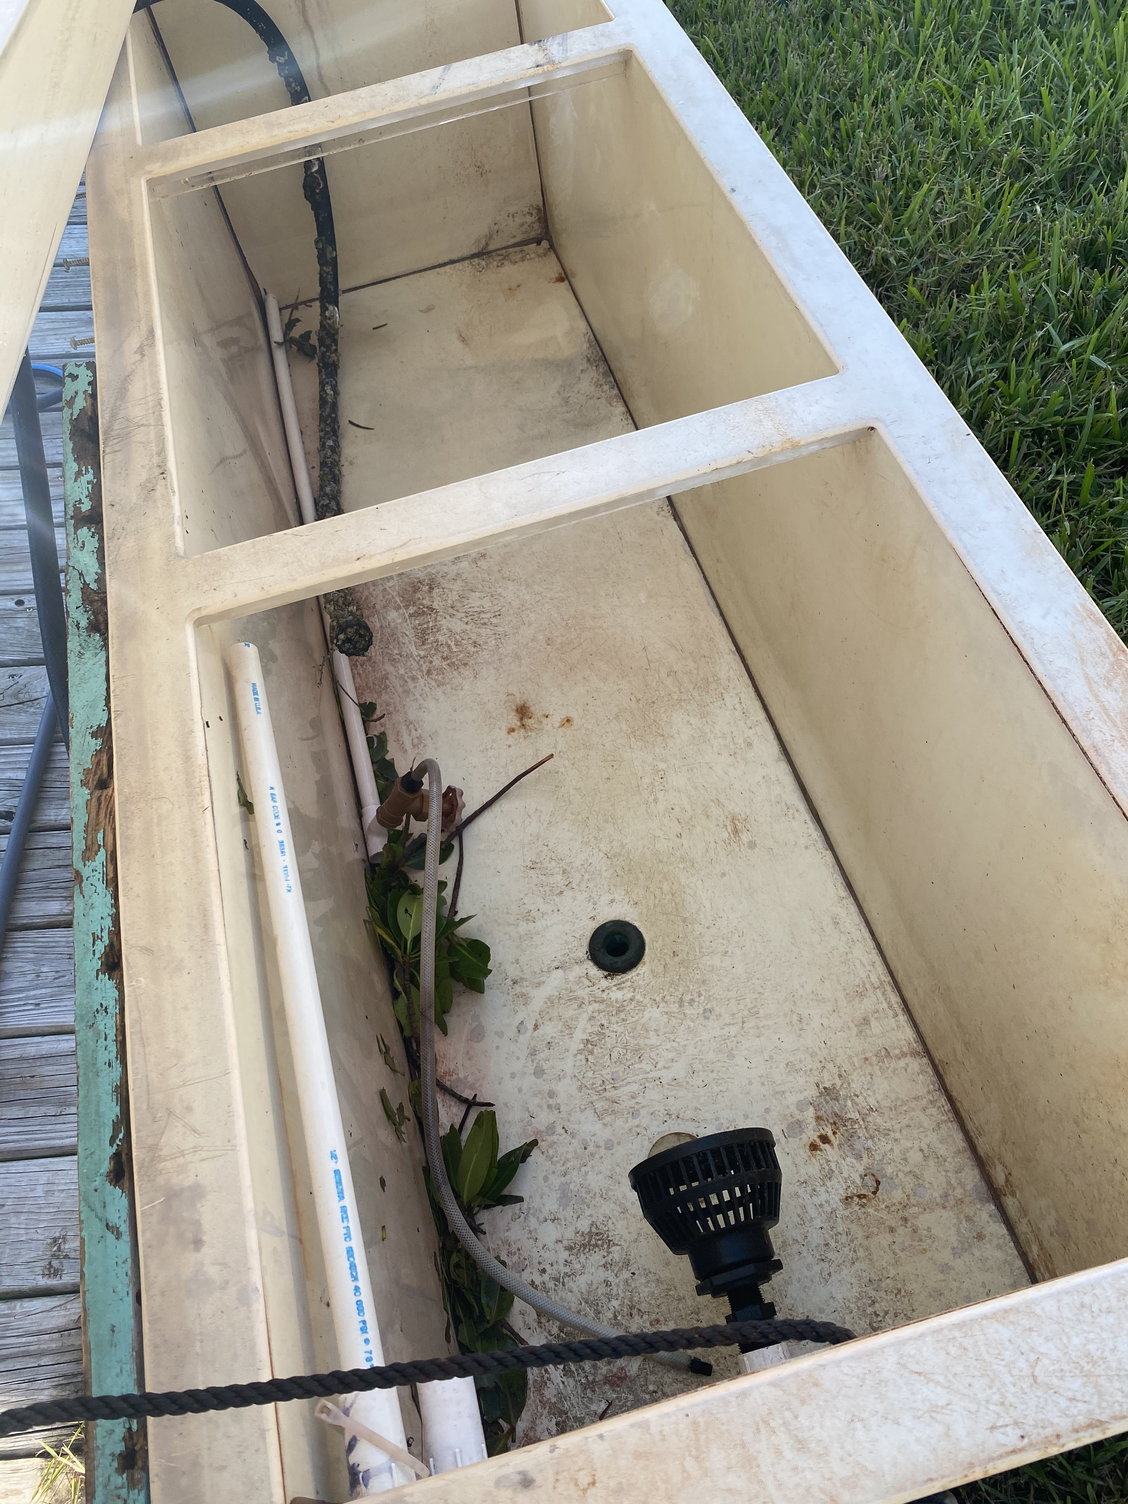 Commercial bait tank- on dock - The Hull Truth - Boating and